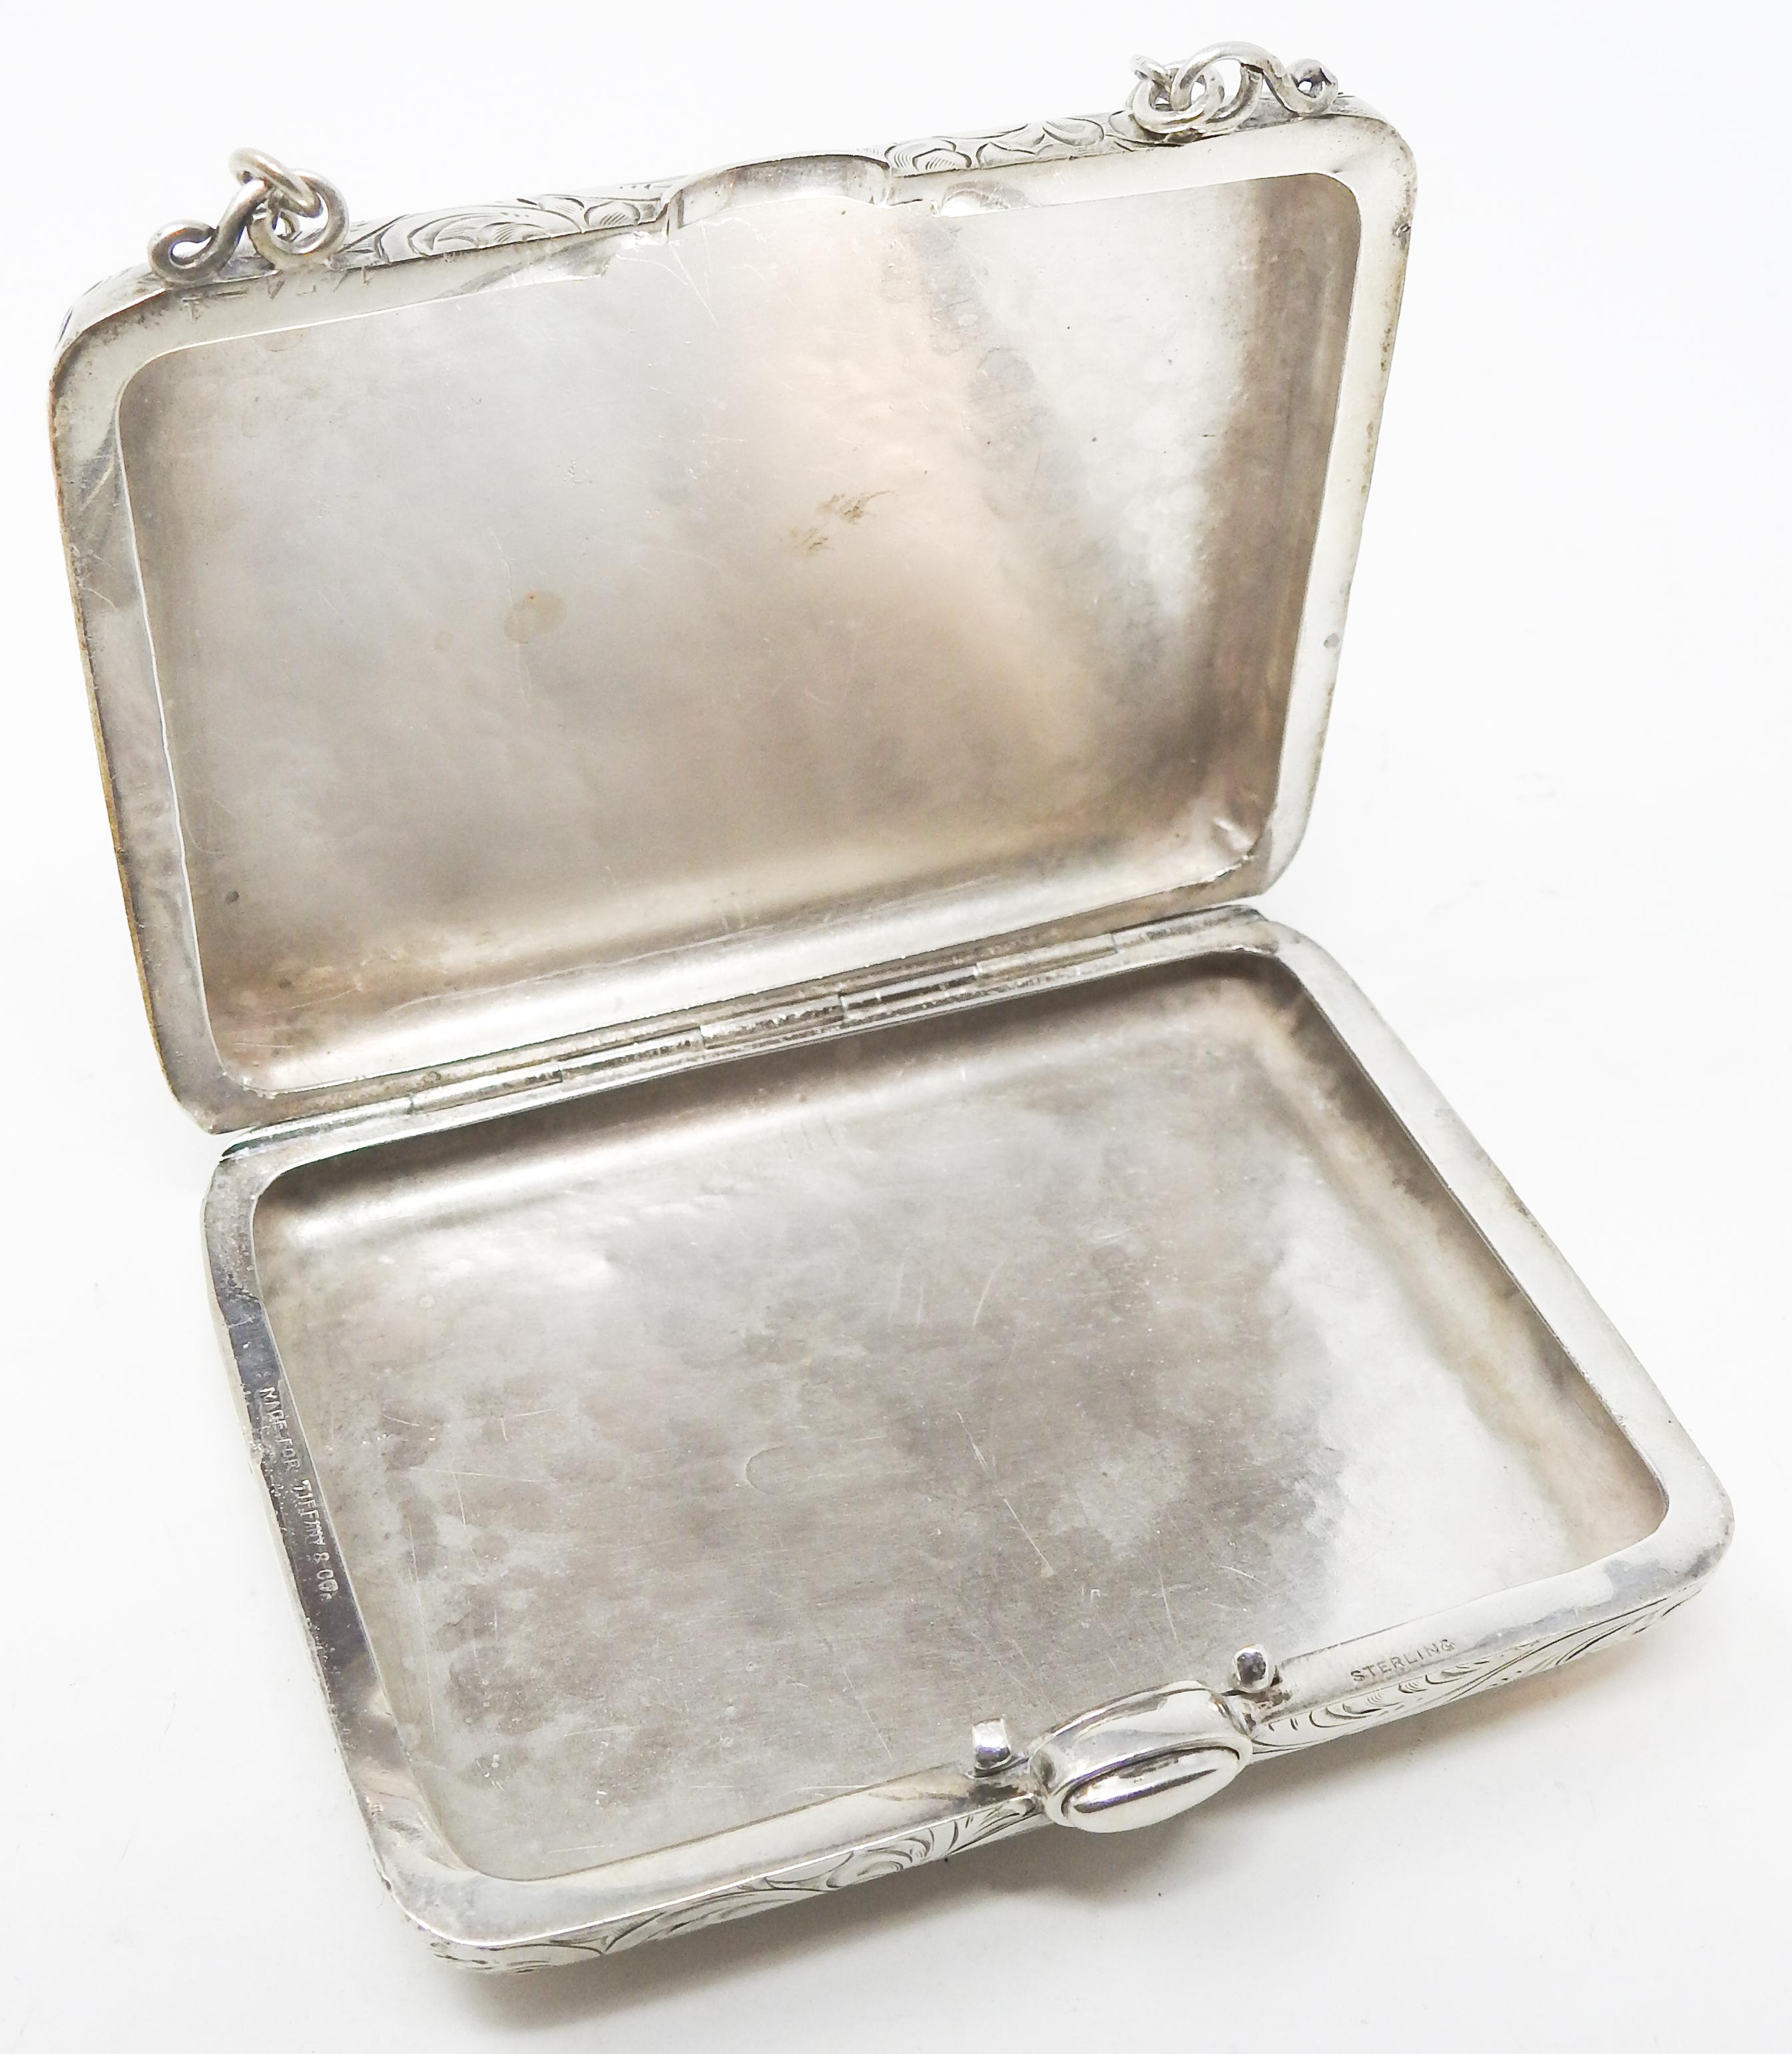 Tiffany & Co. Sterling Silver Change Purse In Fair Condition For Sale In Cookeville, TN